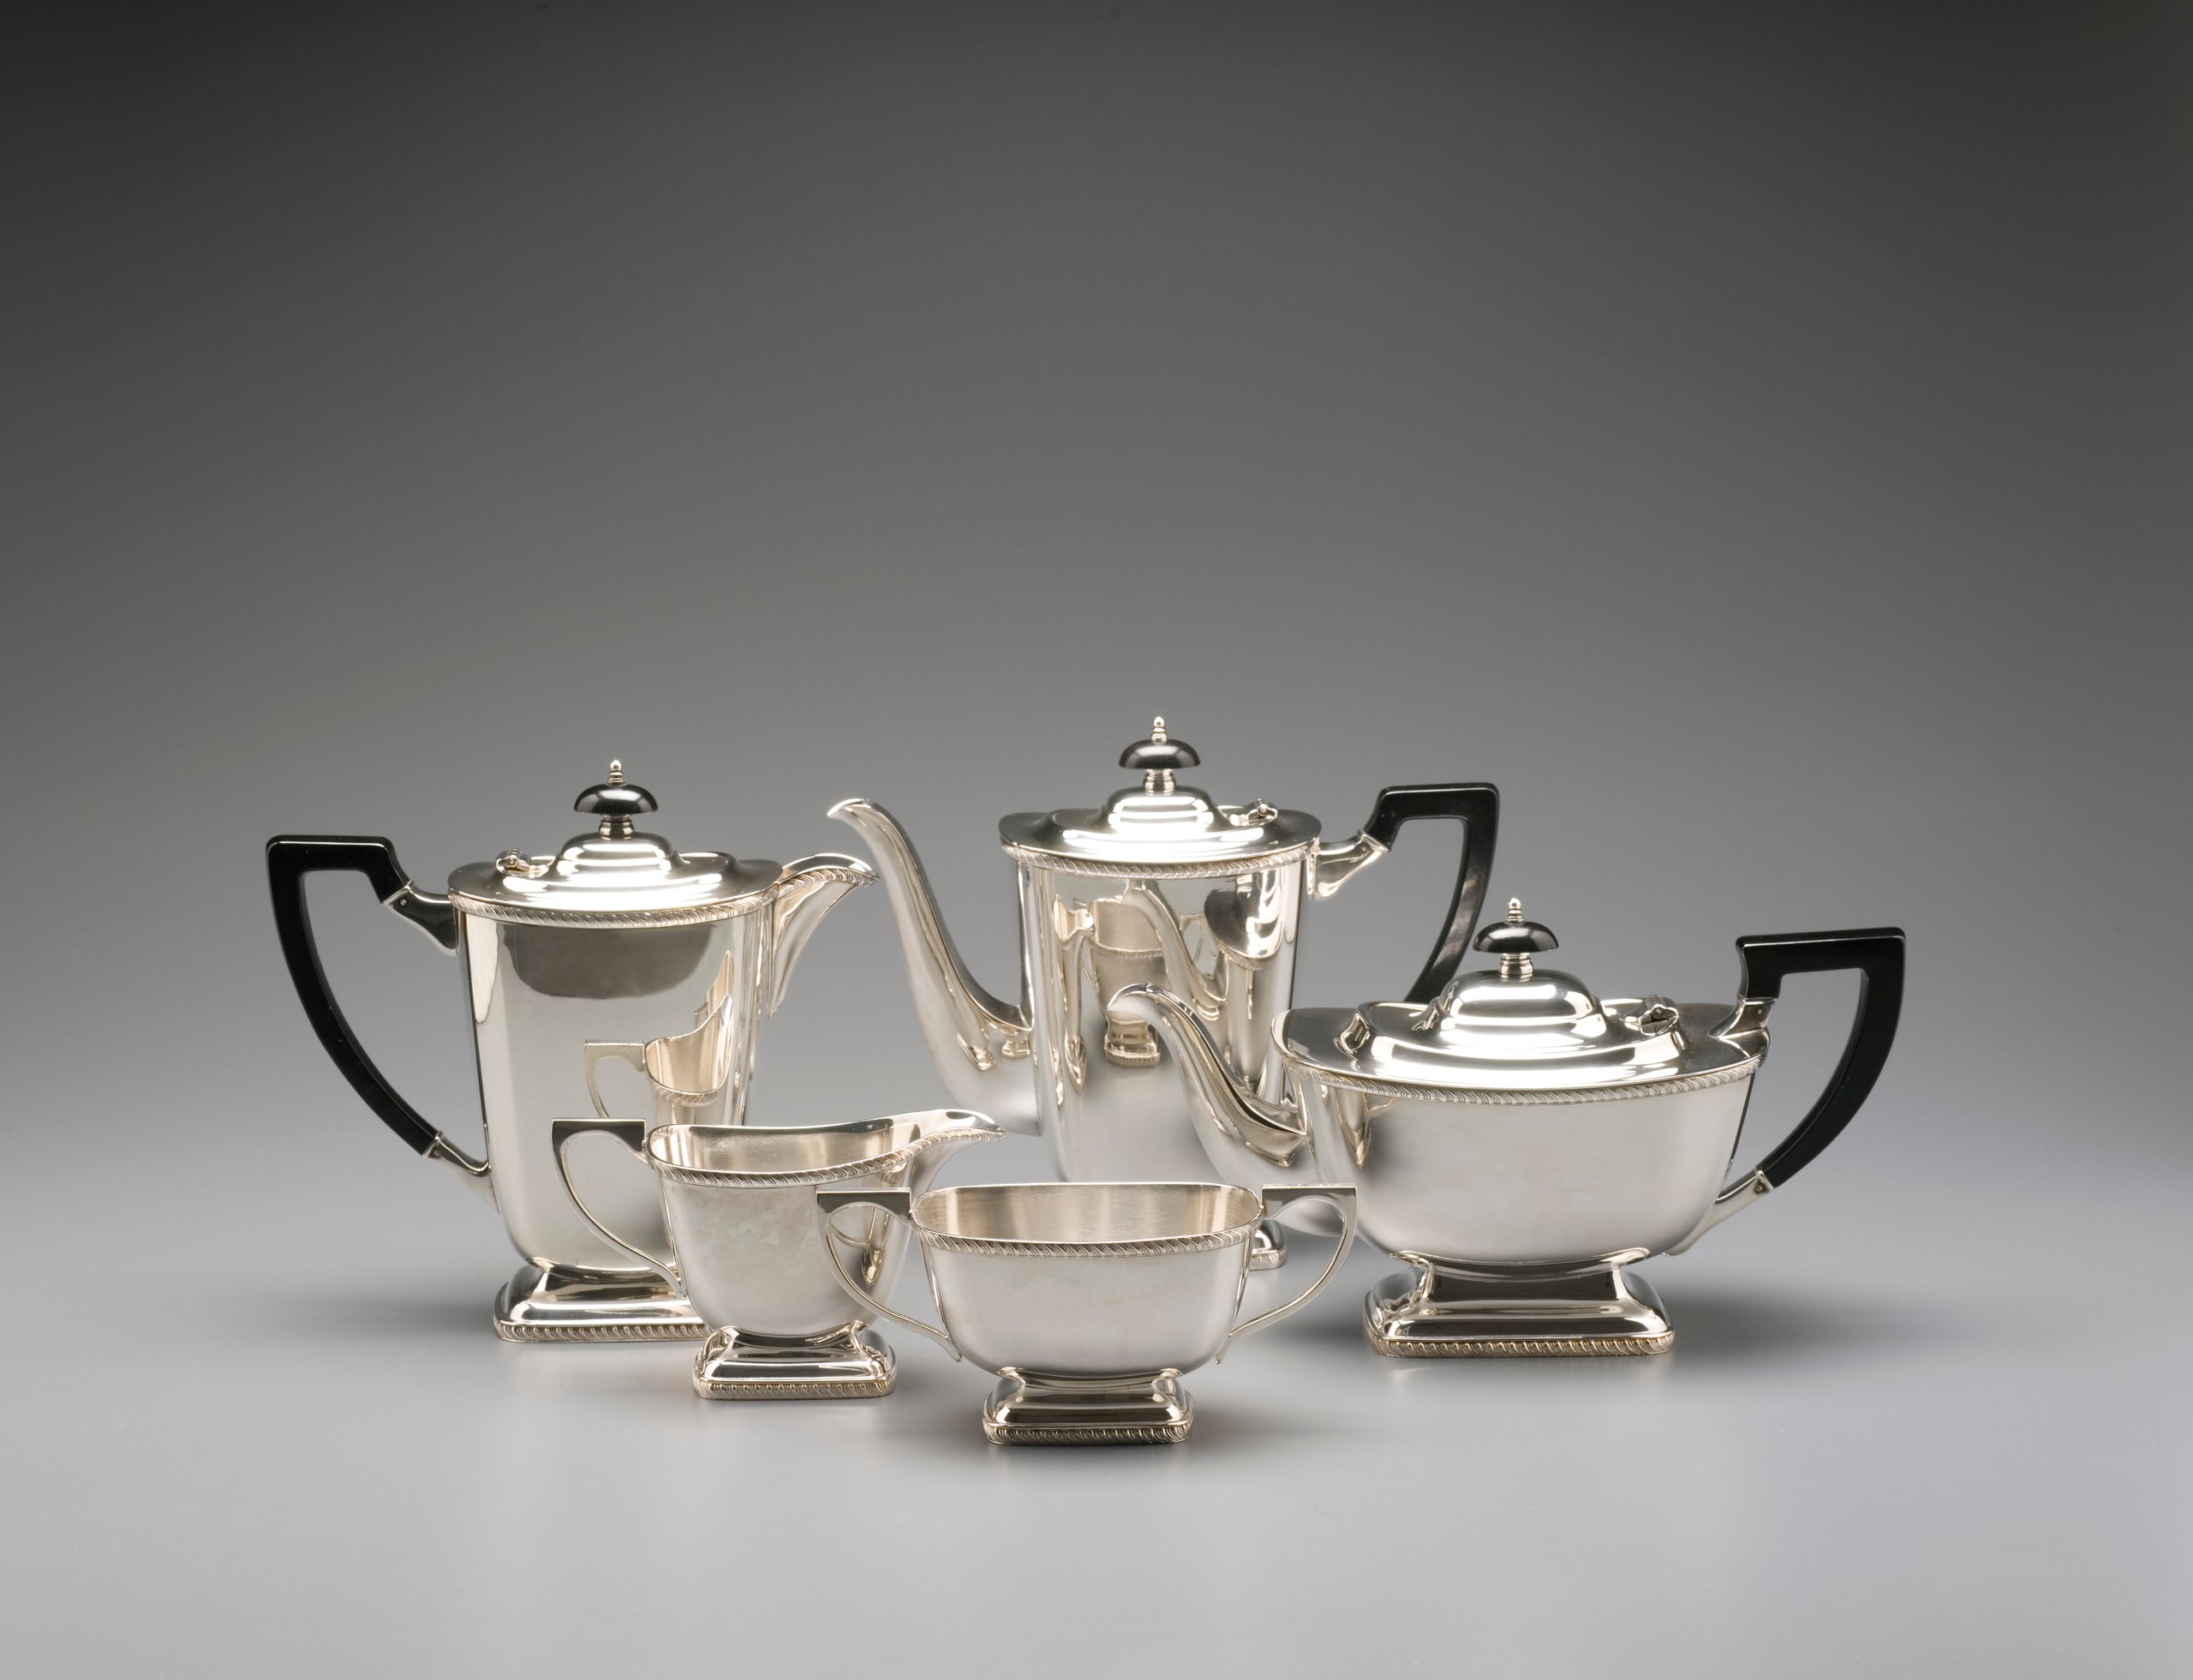 'Hecworth' tea and coffee service set by Platers Pty Ltd